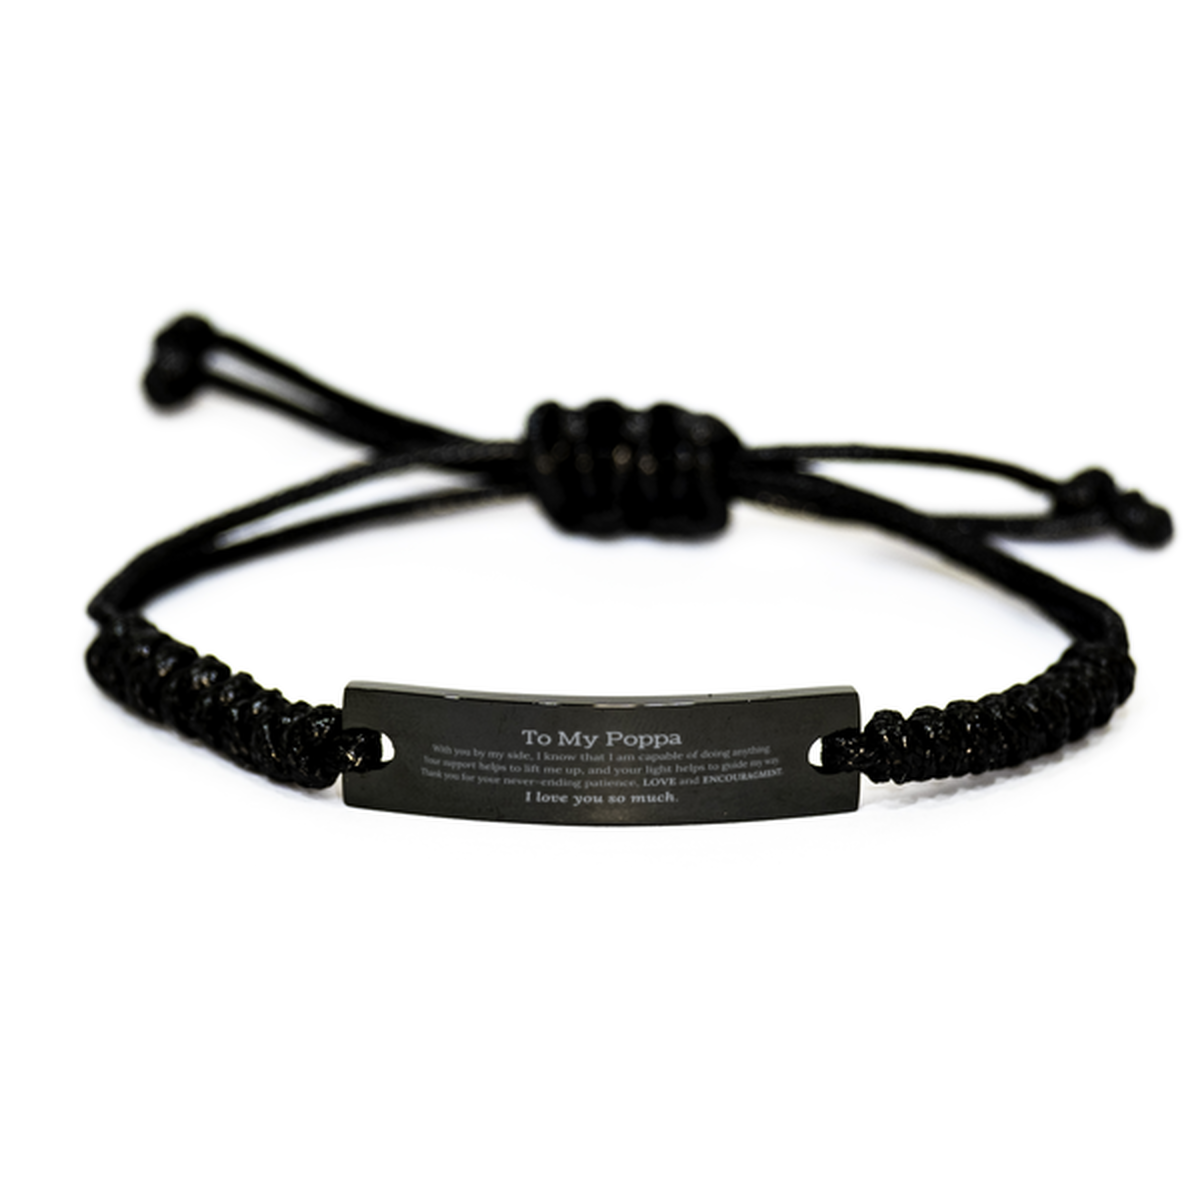 Appreciation Poppa Black Rope Bracelet Gifts, To My Poppa Birthday Christmas Wedding Keepsake Gifts for Poppa With you by my side, I know that I am capable of doing anything. I love you so much